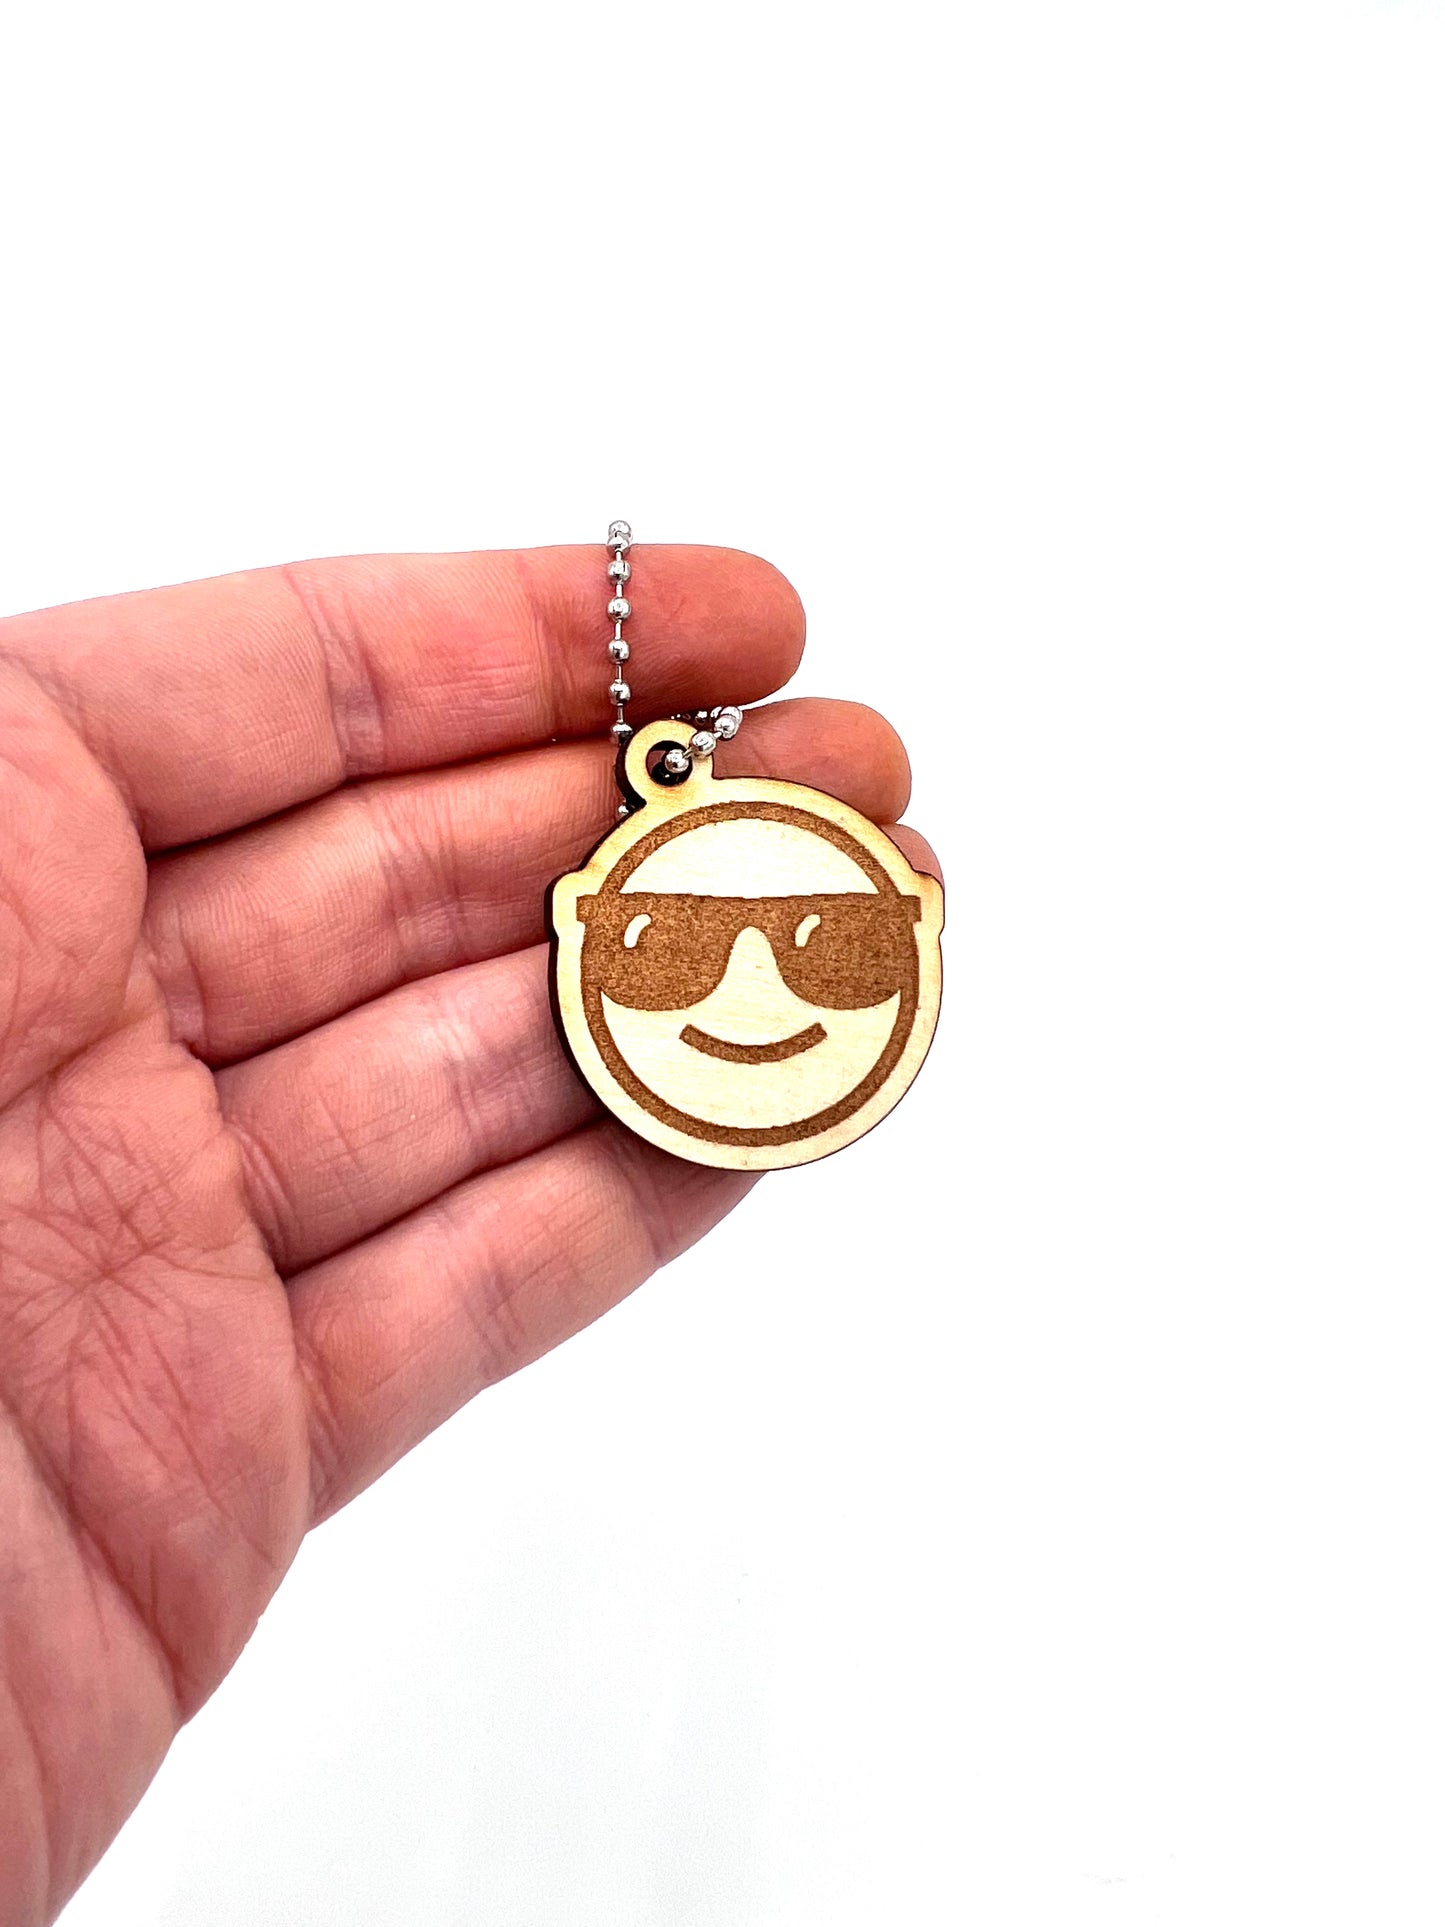 Smiling Face With Sunglasses Emoji Keychain